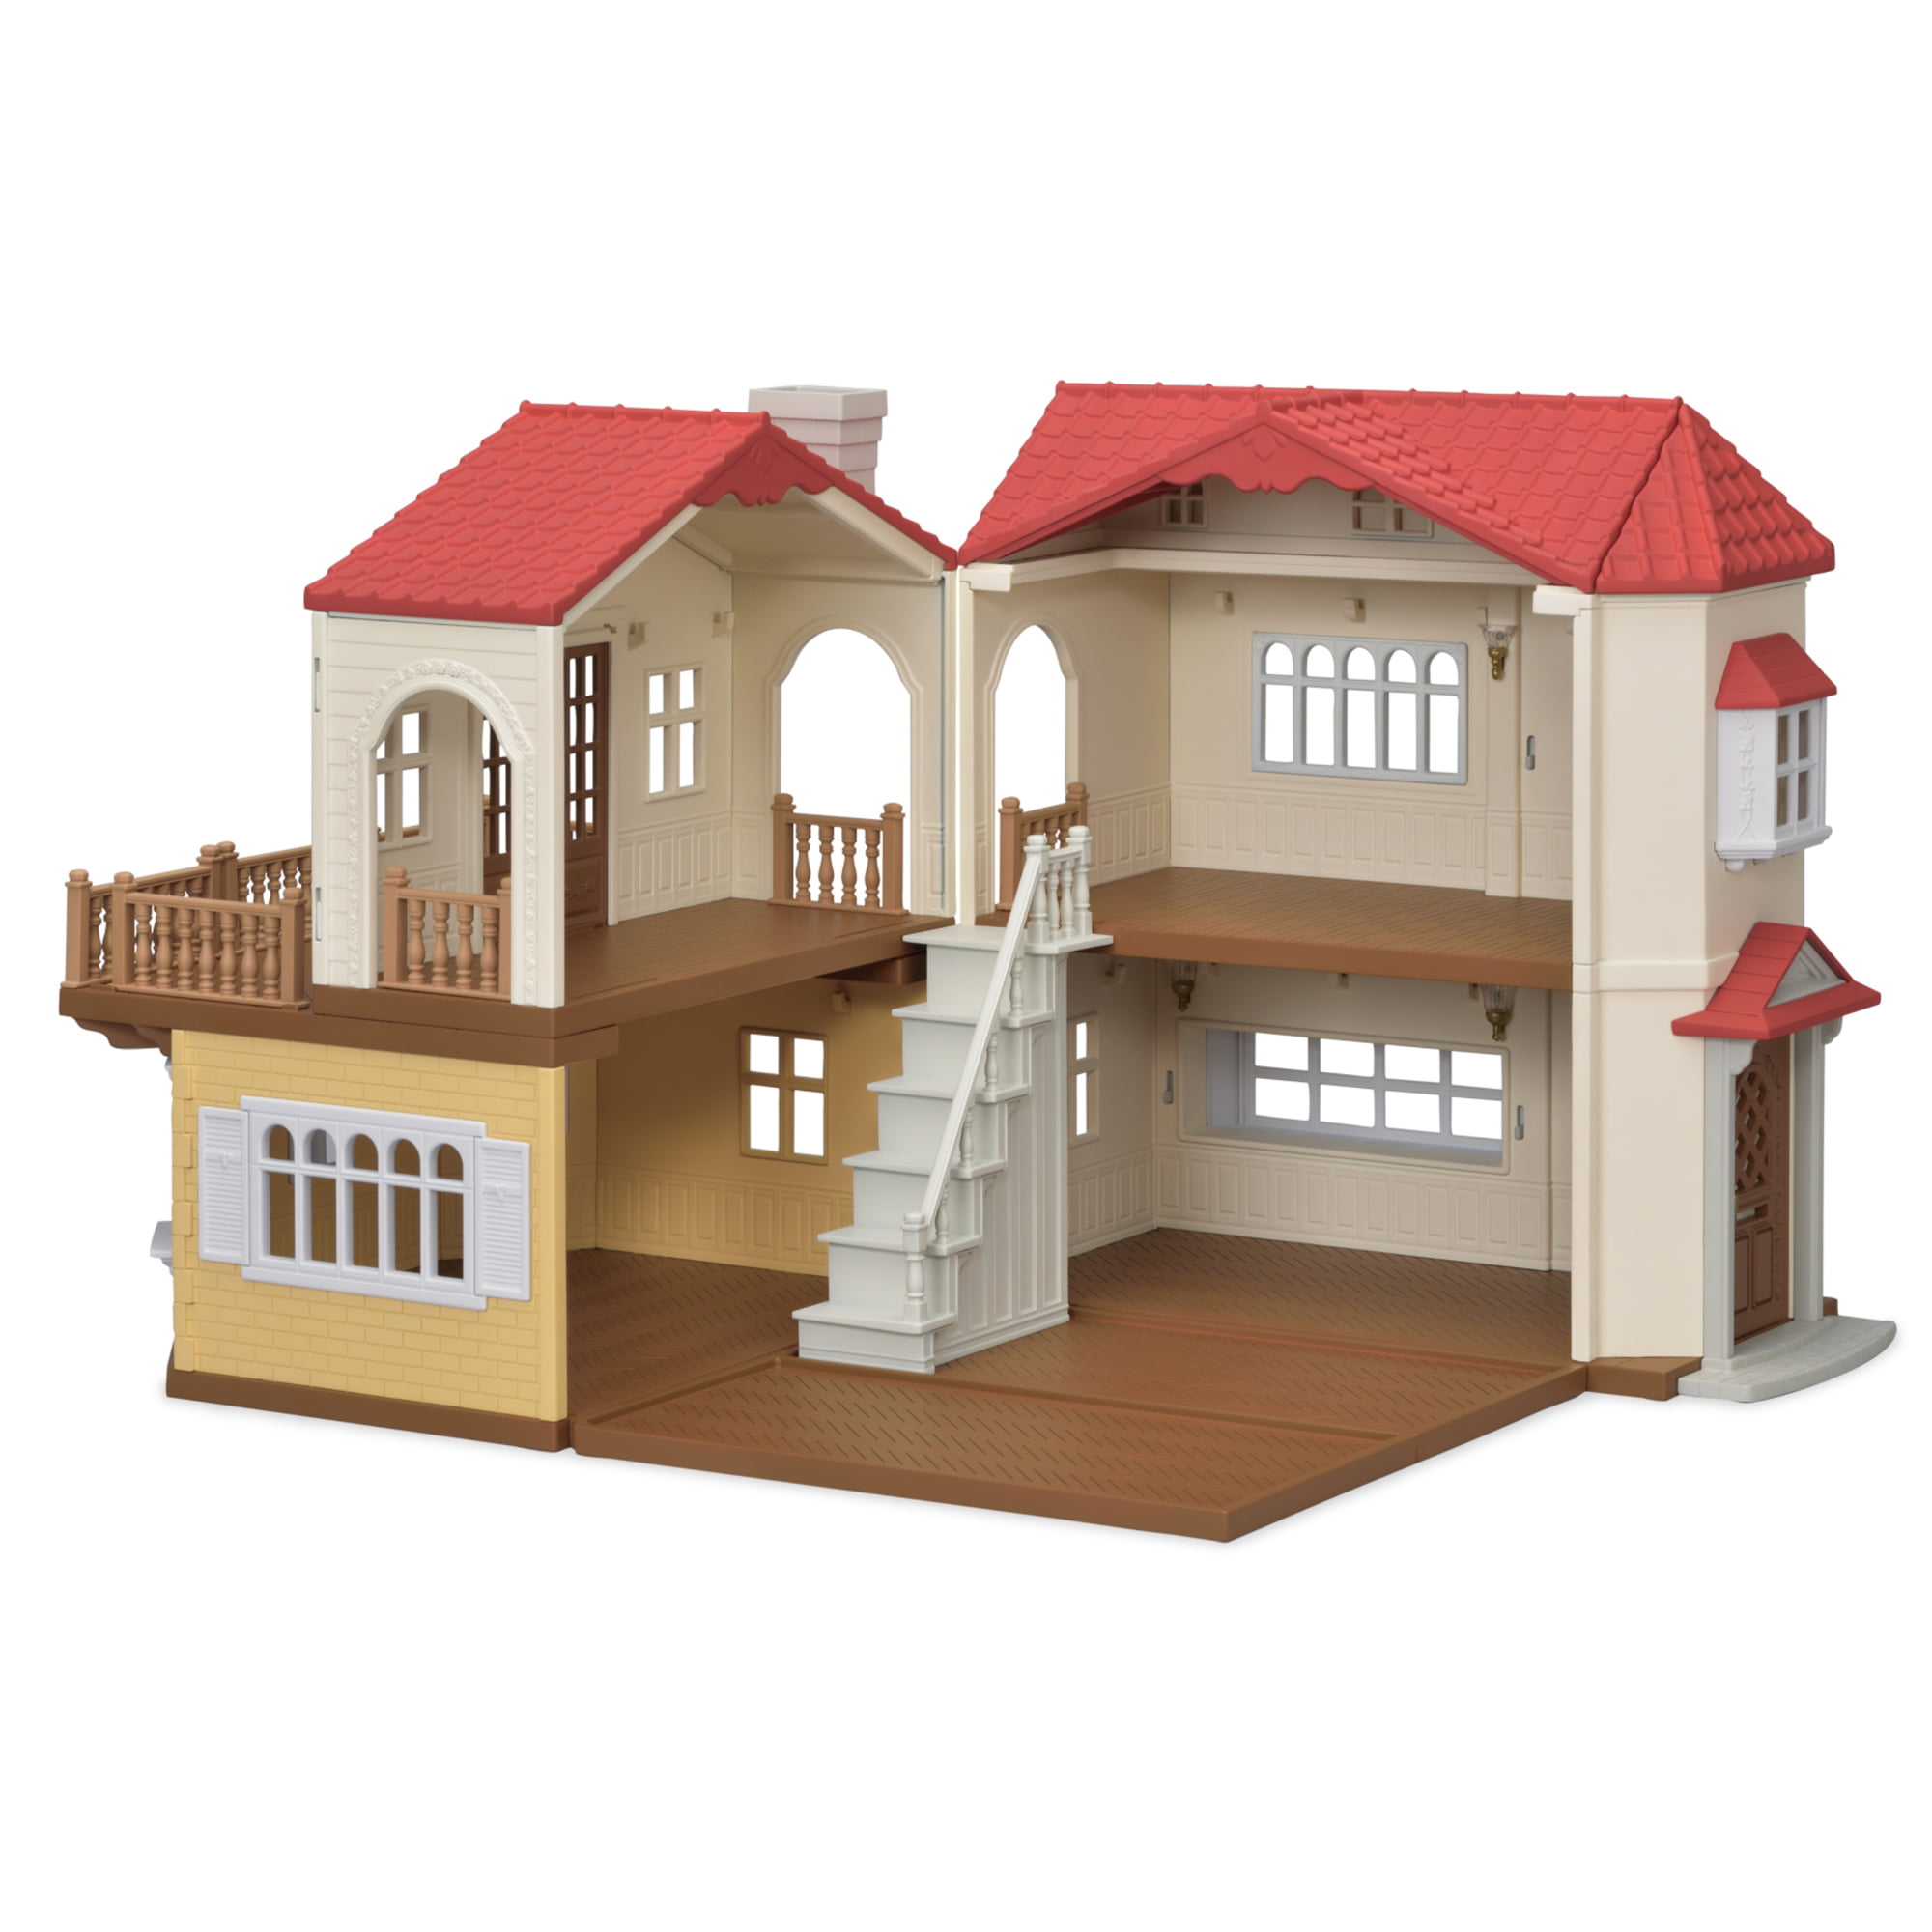 Calico Critters - Red Roof Country Home Gift Set - Walmart.com